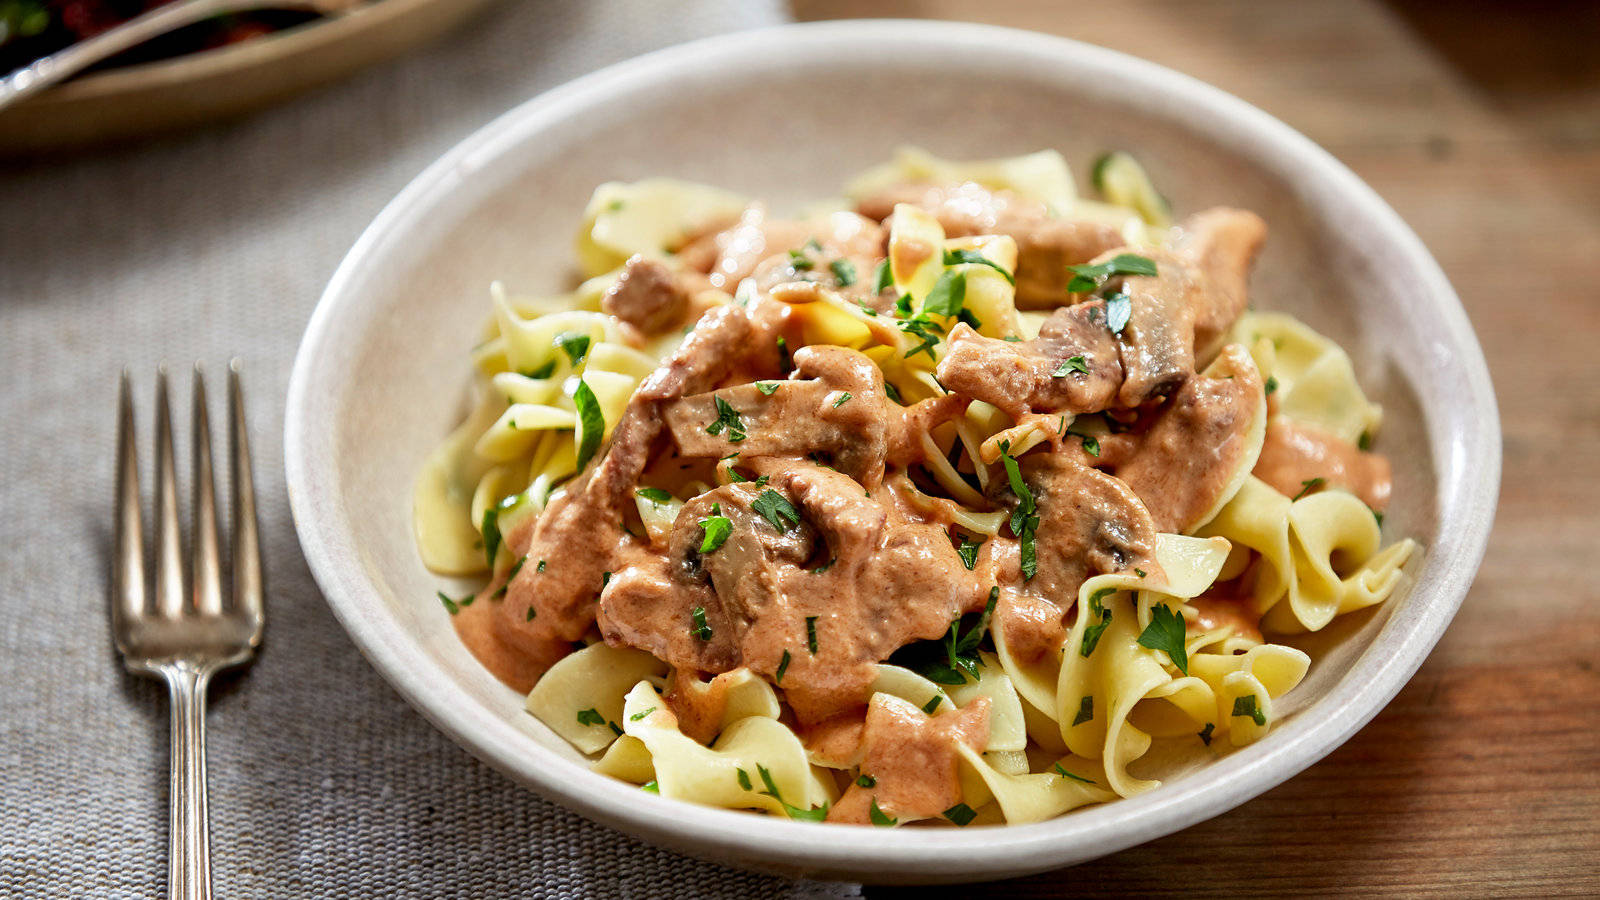 Delectable Beef Stroganoff Served on Pasta Wallpaper